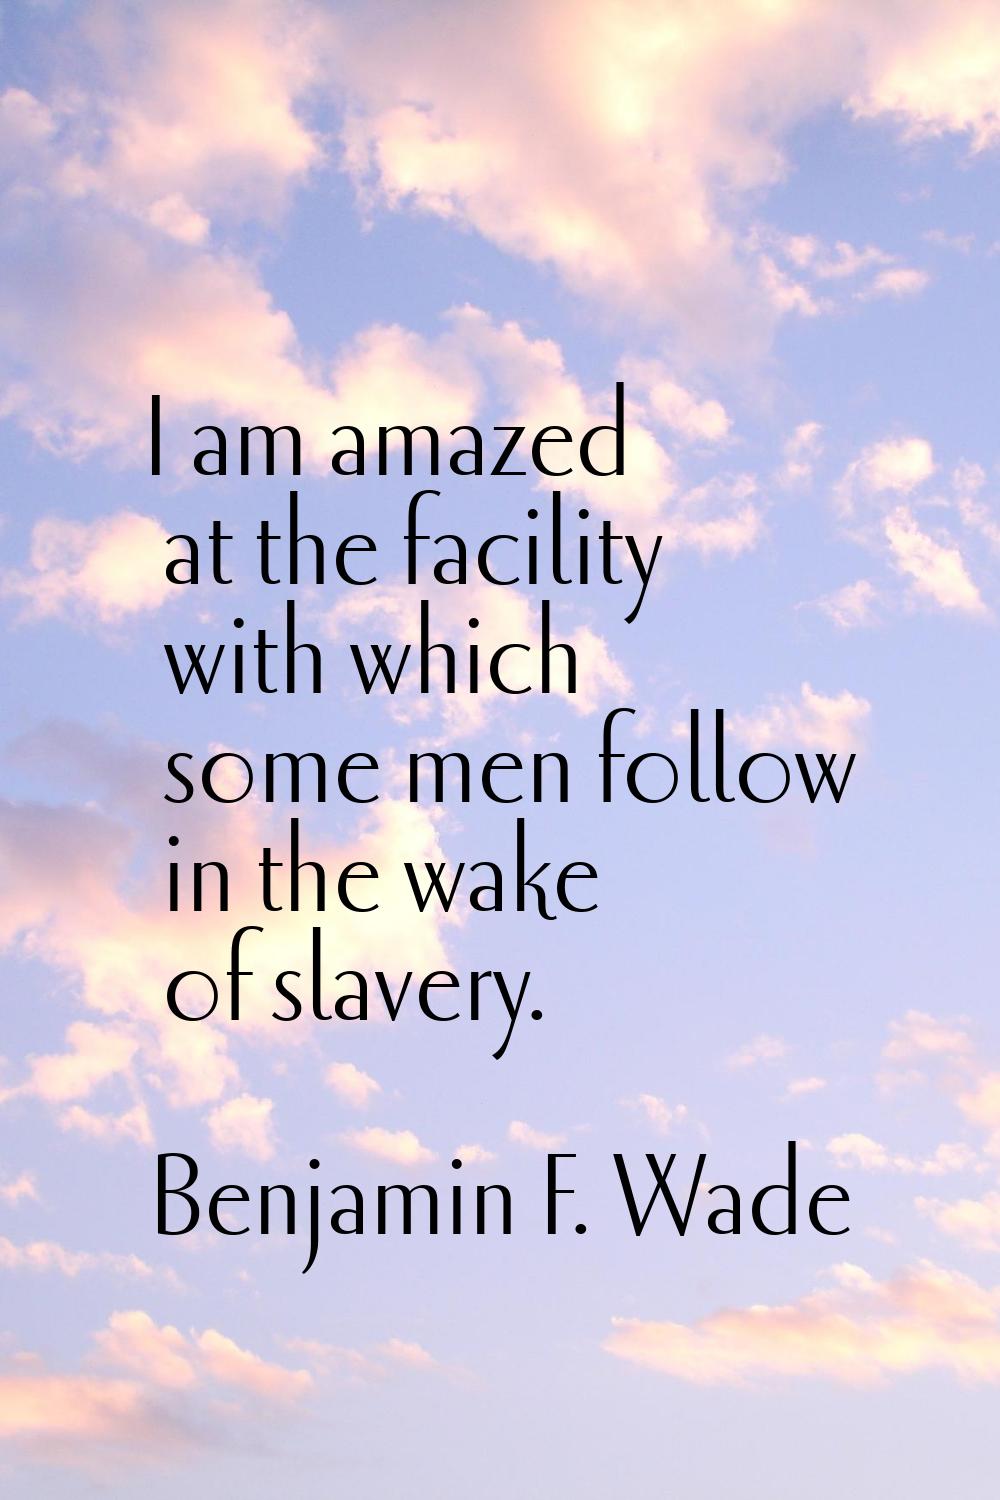 I am amazed at the facility with which some men follow in the wake of slavery.